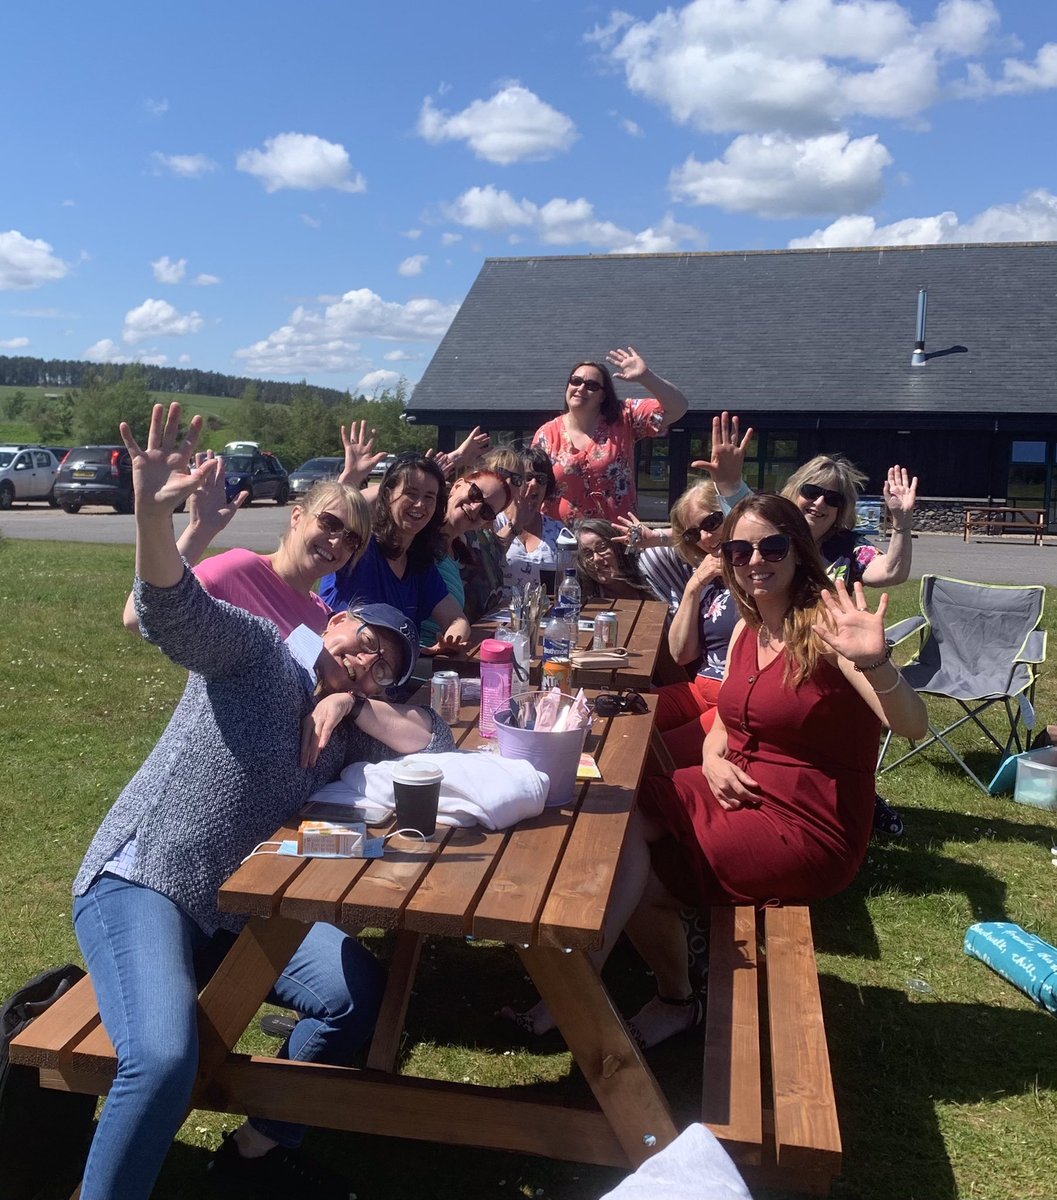 Finally back together again in the real world #Teamformartine #formartinehvs Team day out - paddle boarding ( for some!) Delicious afternoon tea, lots of laughs - good for the soul @RosieCrighton @RaeJenniffer @juliemain70 @knockburnloch